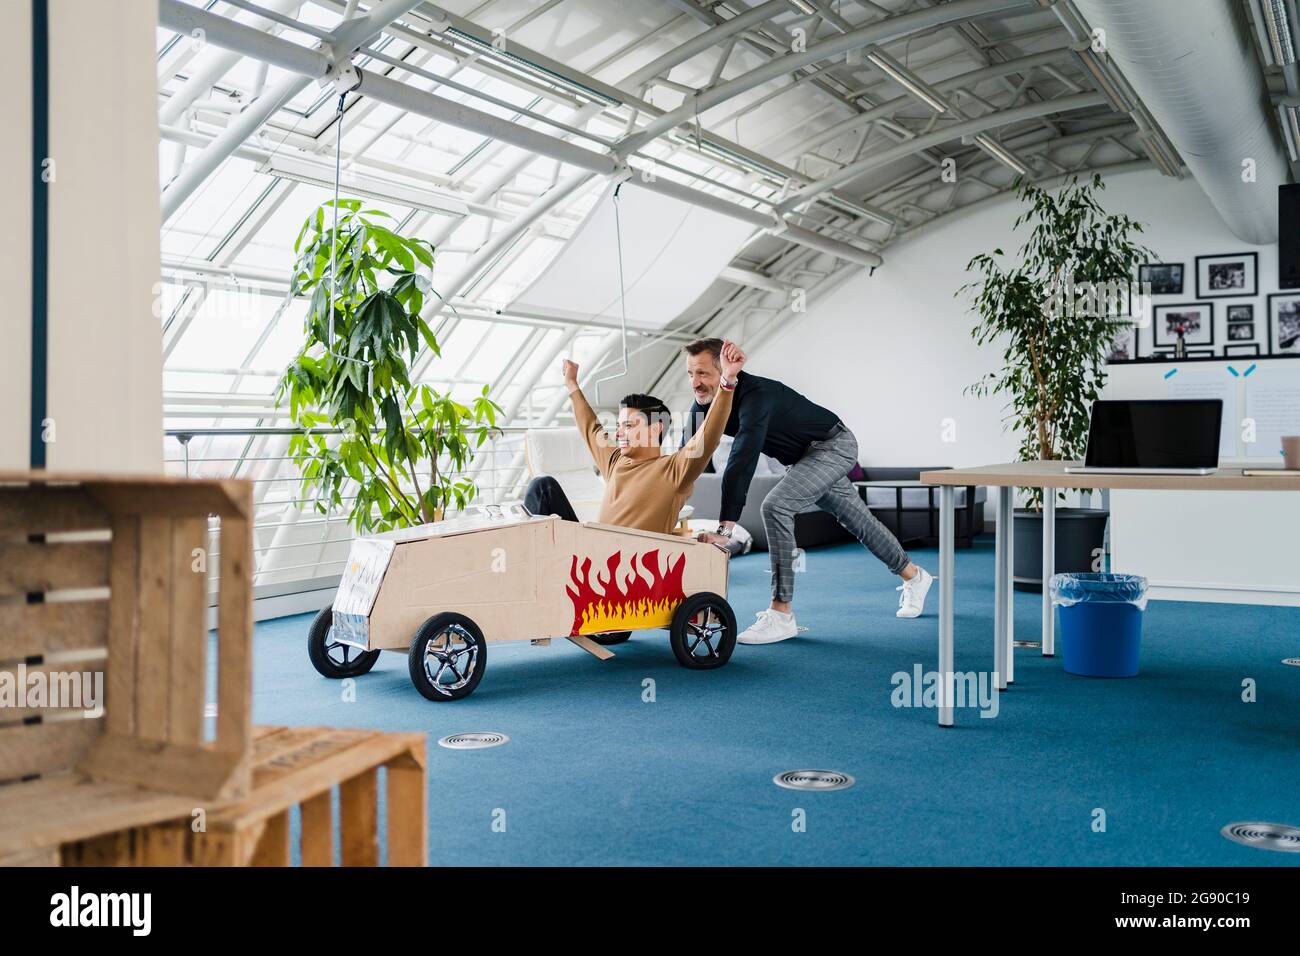 Colleague pushing cheerful businessman sitting in toy car at creative office Stock Photo